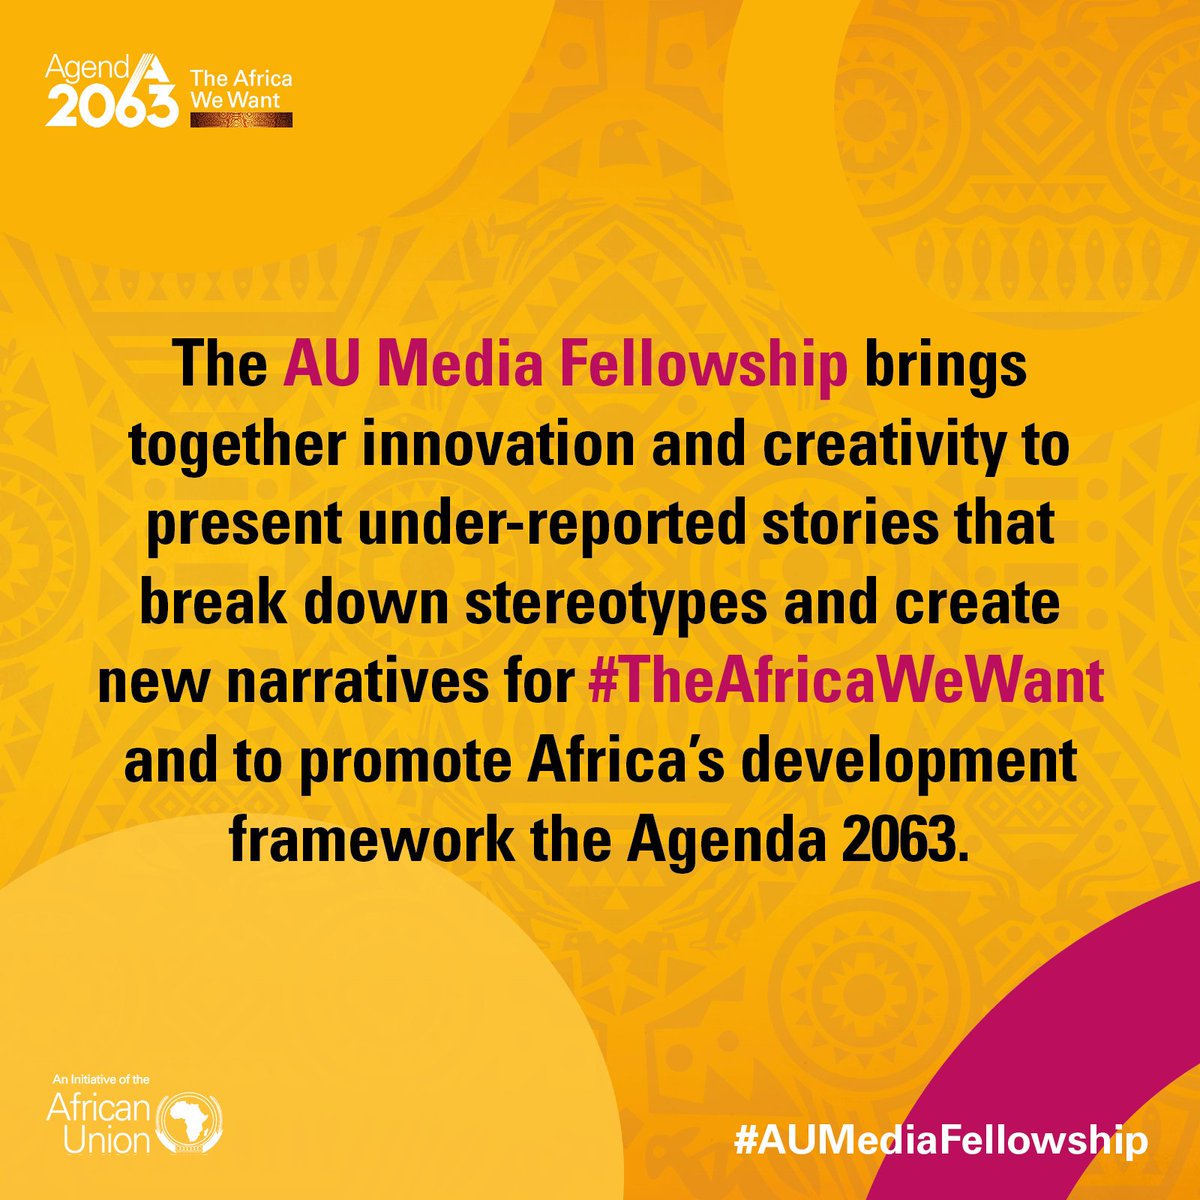 The AU Media Fellowship brings together innovation and creativity to present under-reported stories that break down stereotypes and create new narratives for the Africa we Want and to promote Africa’s development framework the Agenda 2063. 
#AUMediaFellowship #TheAfricaWeWant